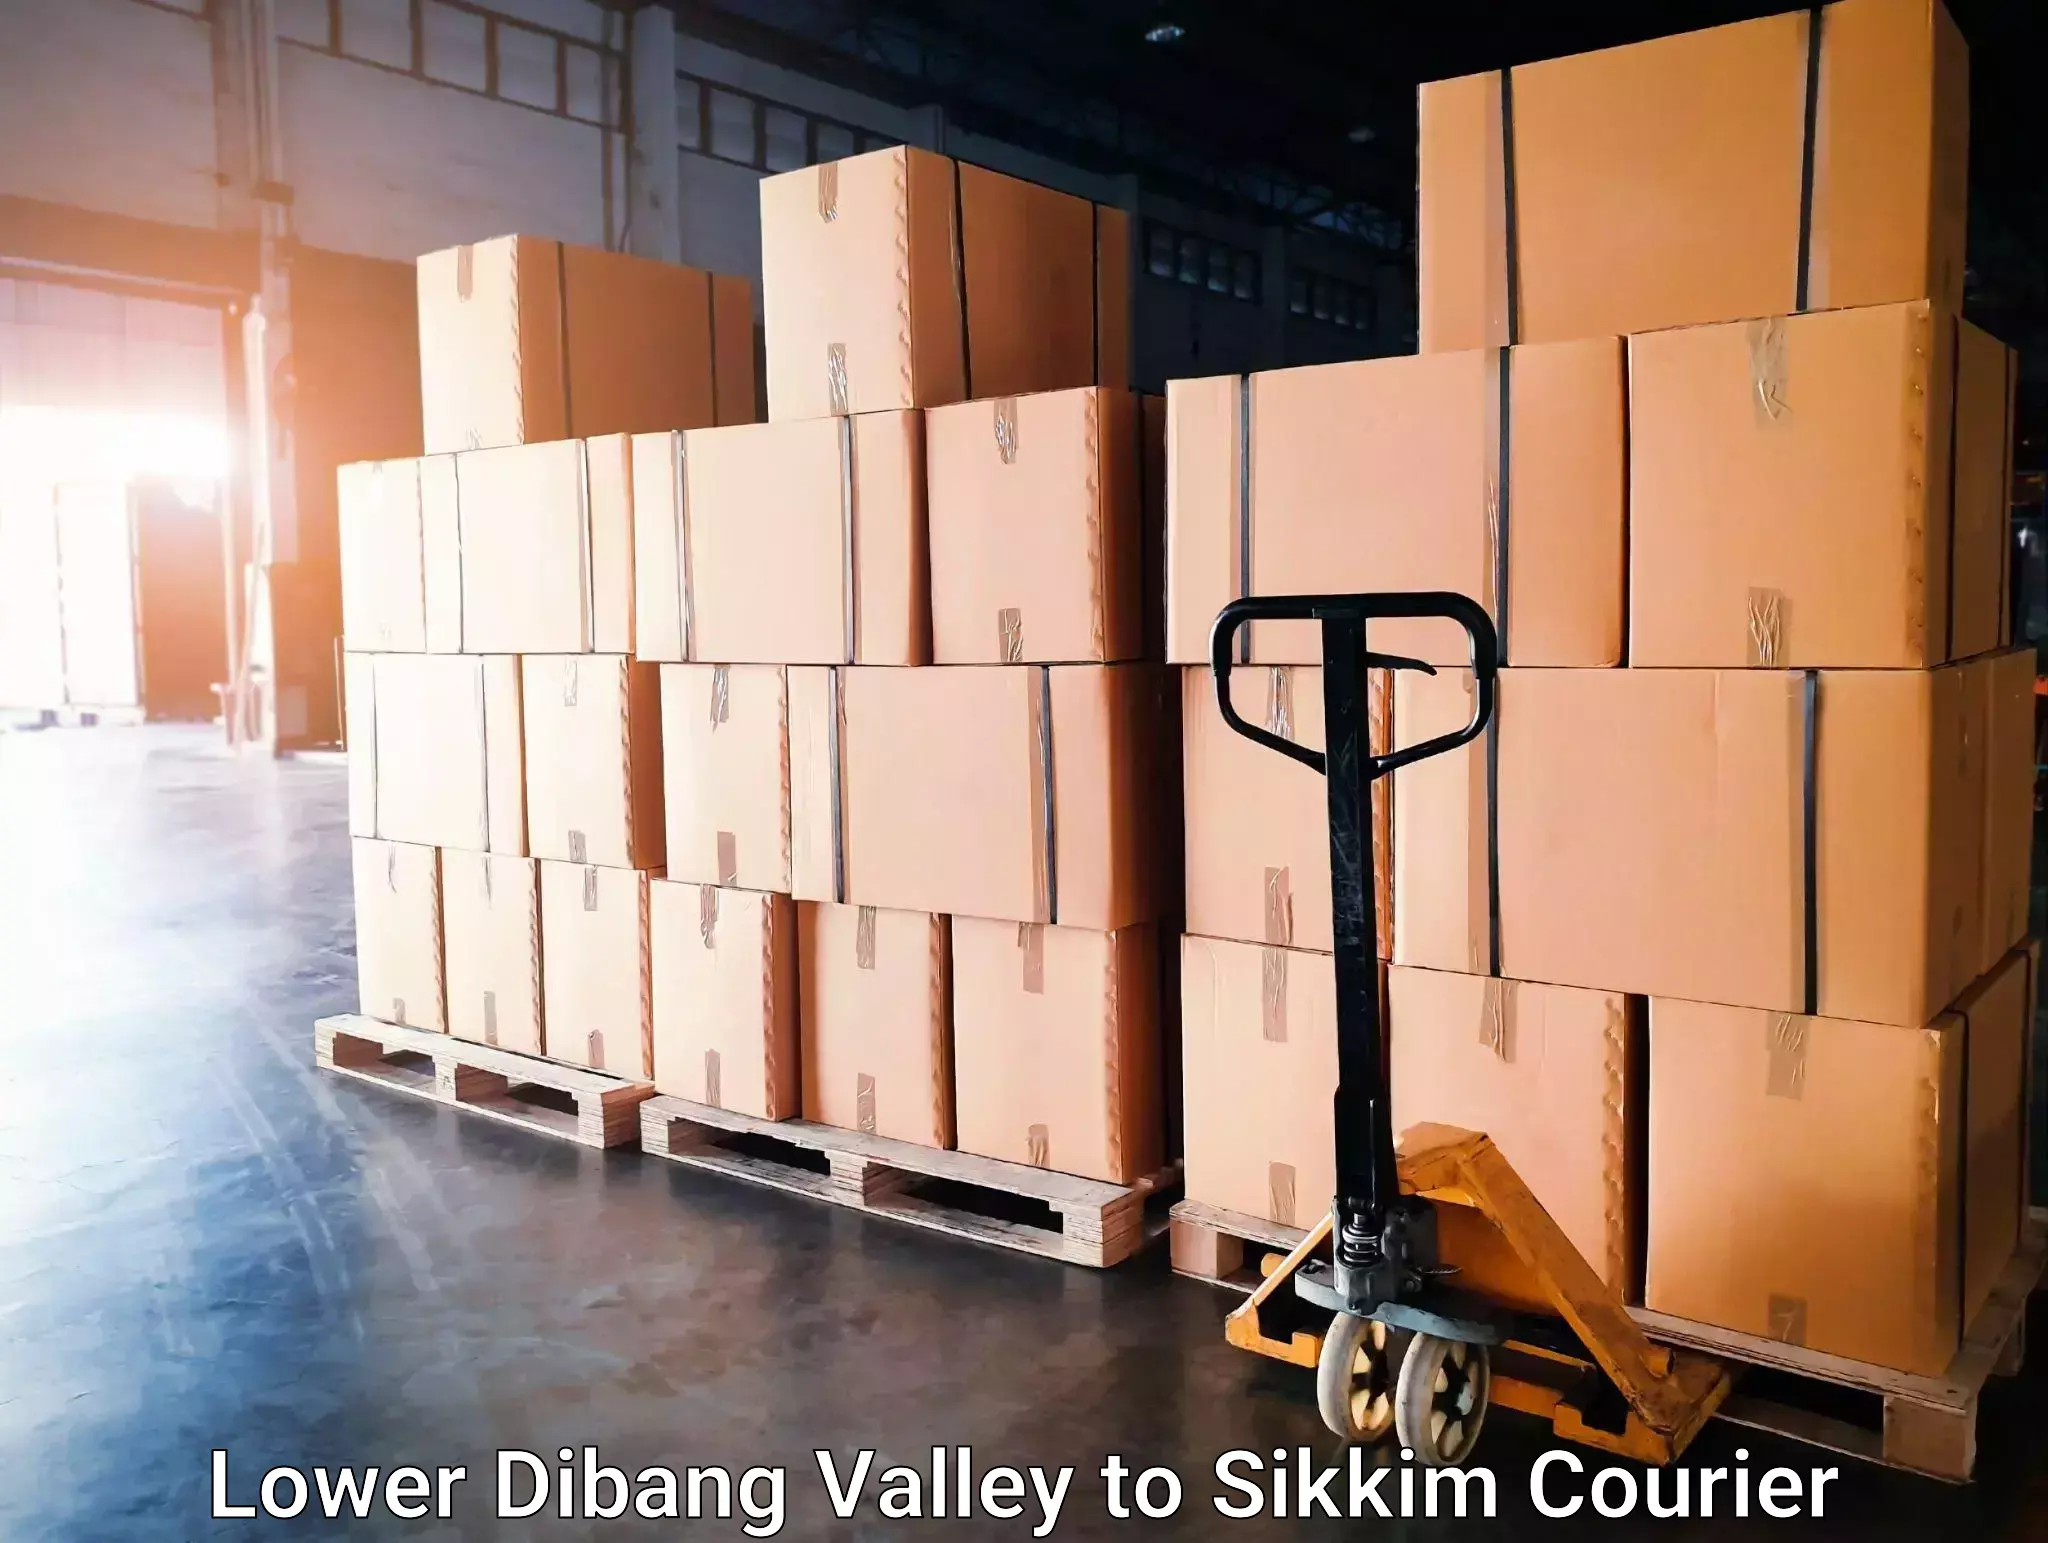 Courier service comparison Lower Dibang Valley to North Sikkim